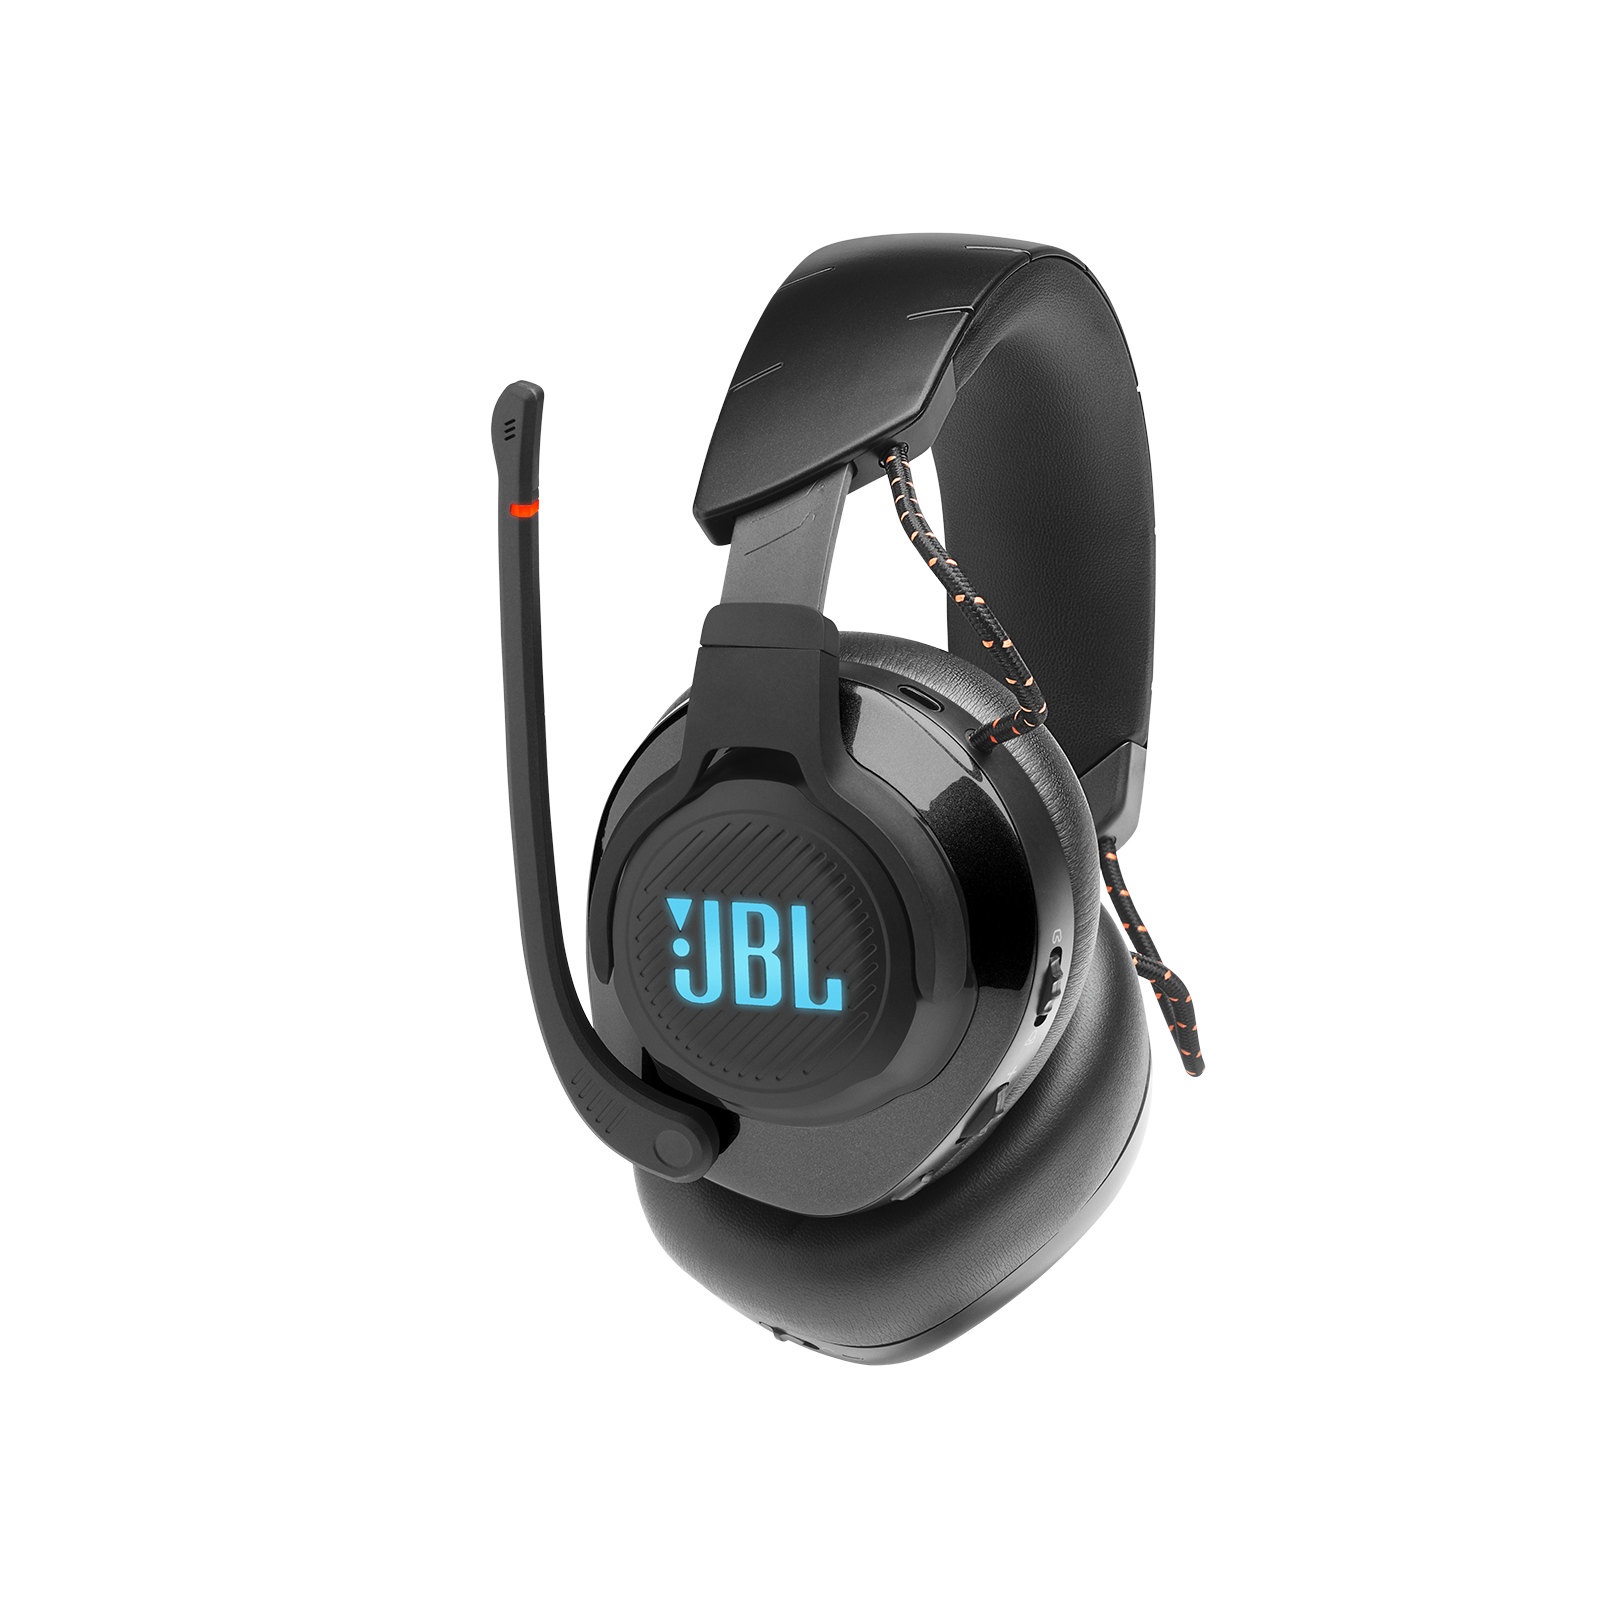 JBL Quantum 600 - Black - Wireless over-ear performance PC gaming headset with surround sound and game-chat balance dial - Detailshot 1